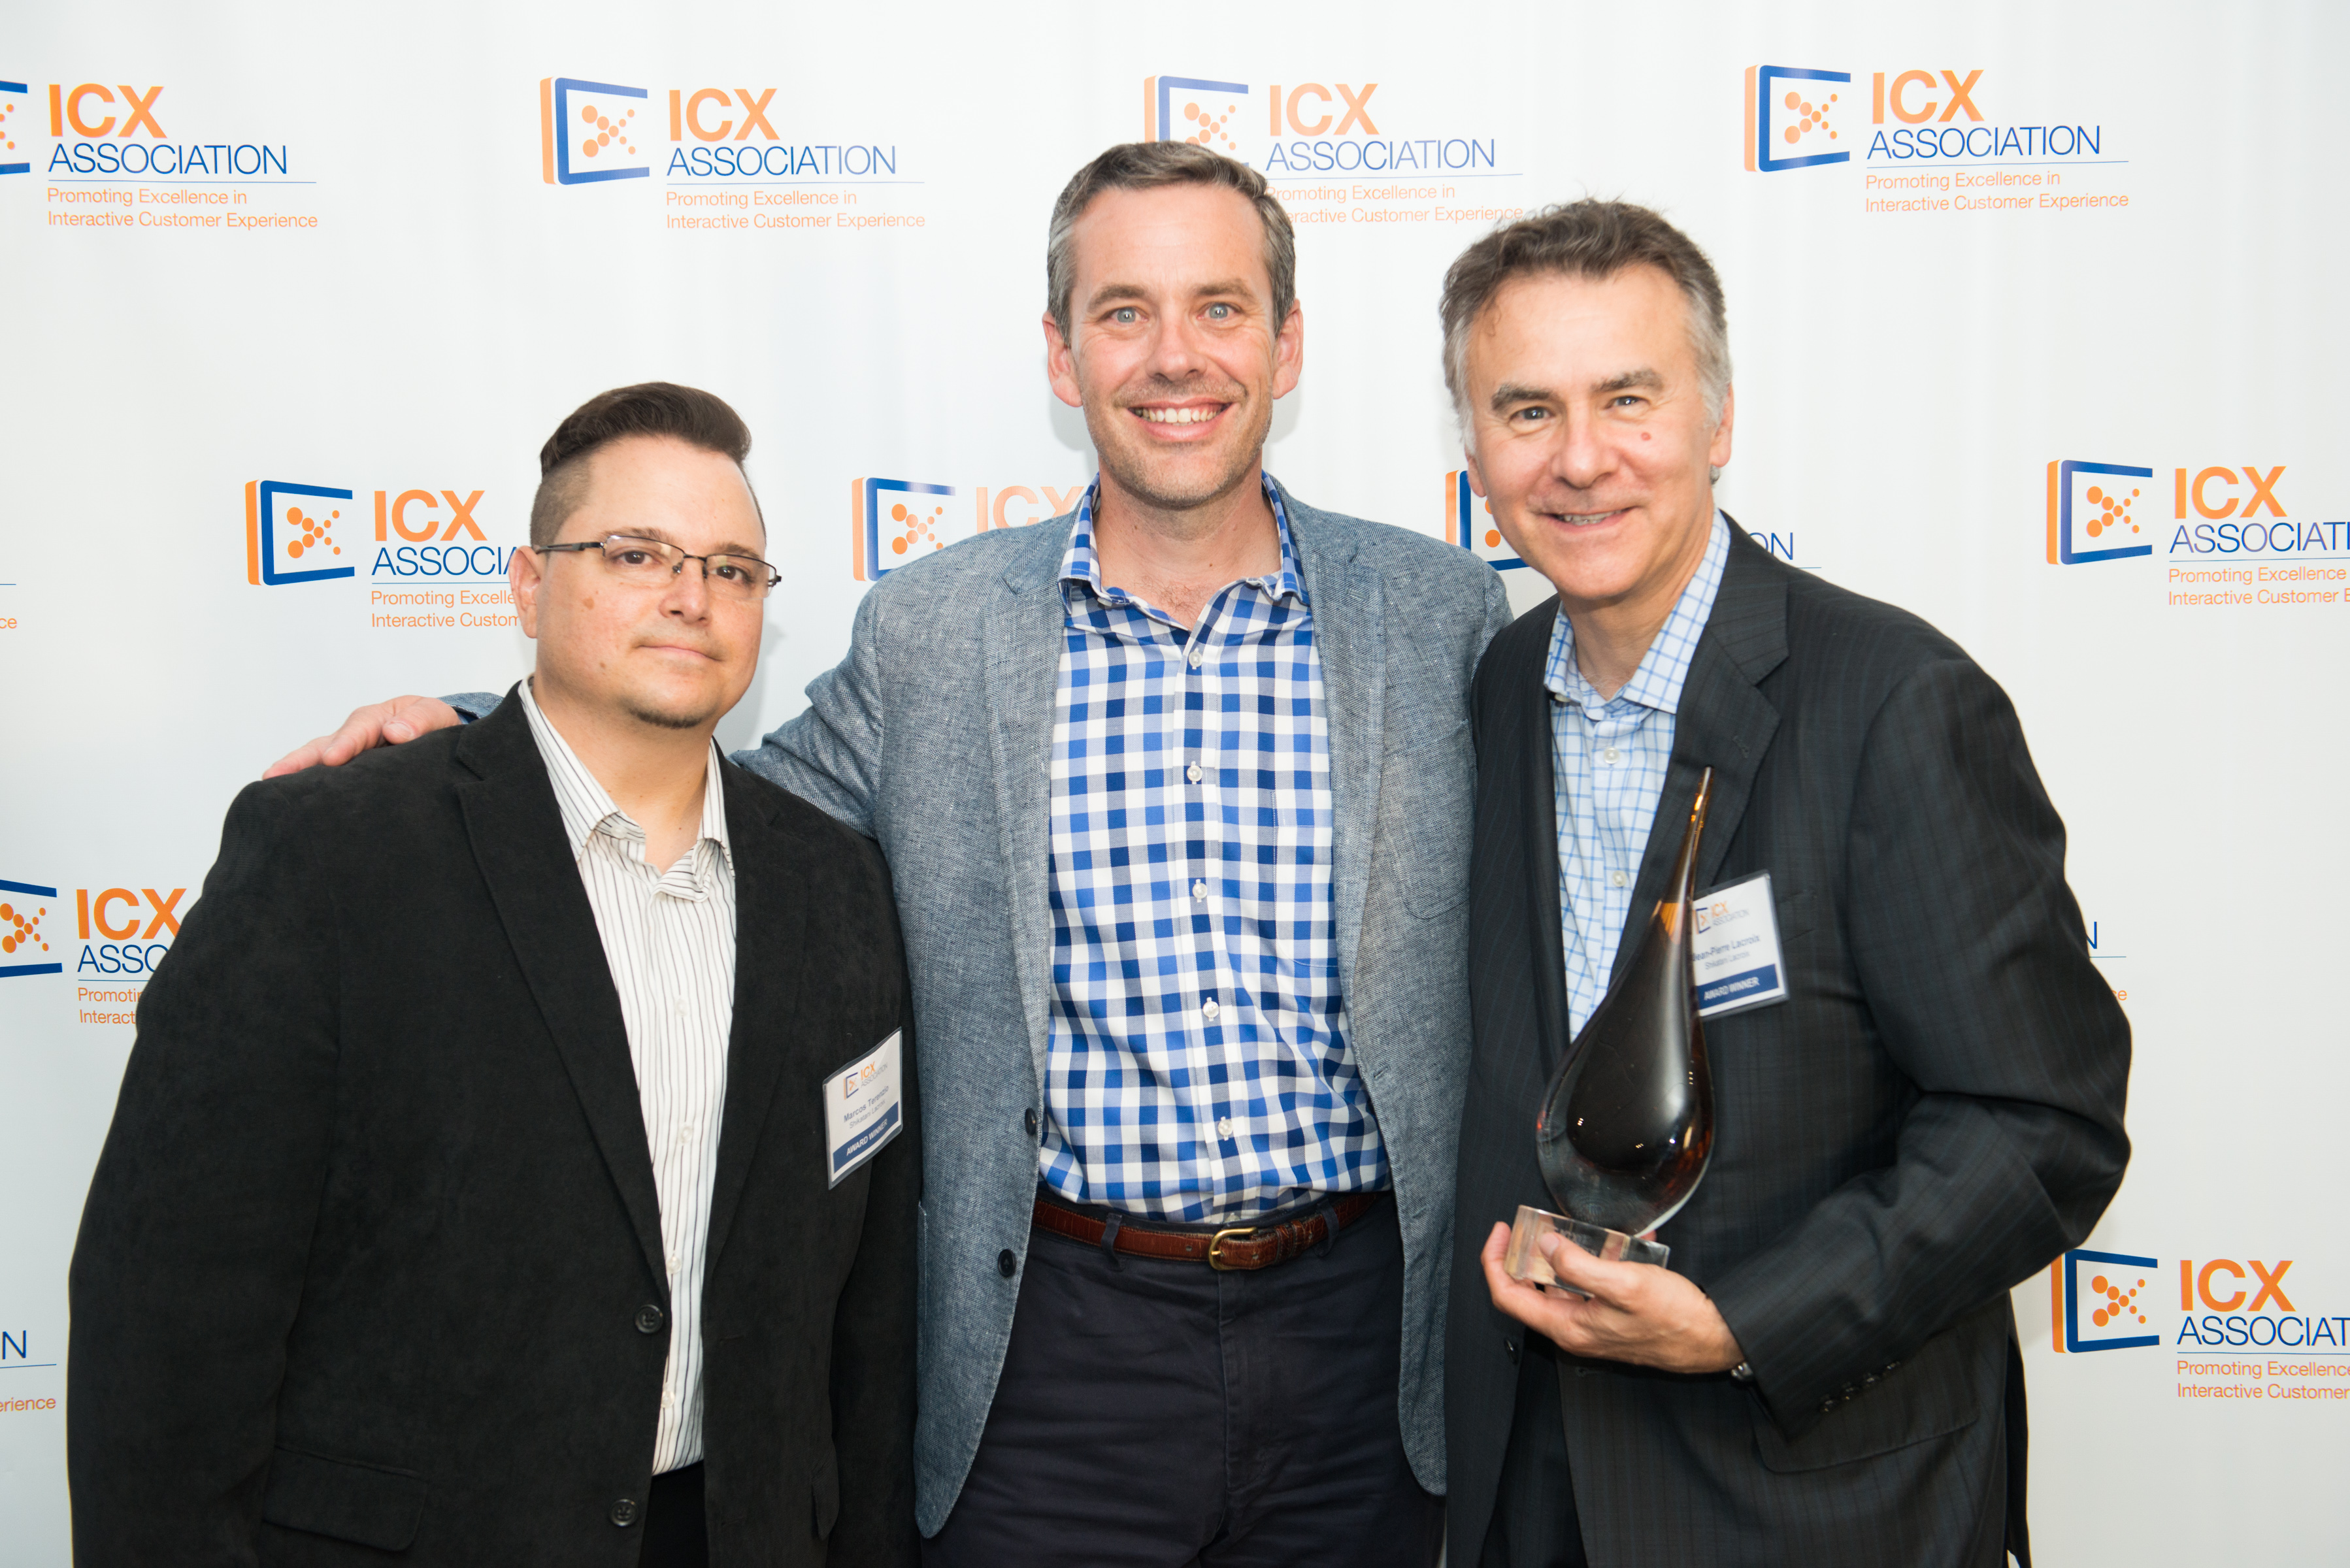 Shikatani Lacroix won for "Best Retail Deployment: Digital Signage" for their work for the Toronto Bluejays Flagship Retail Shop.